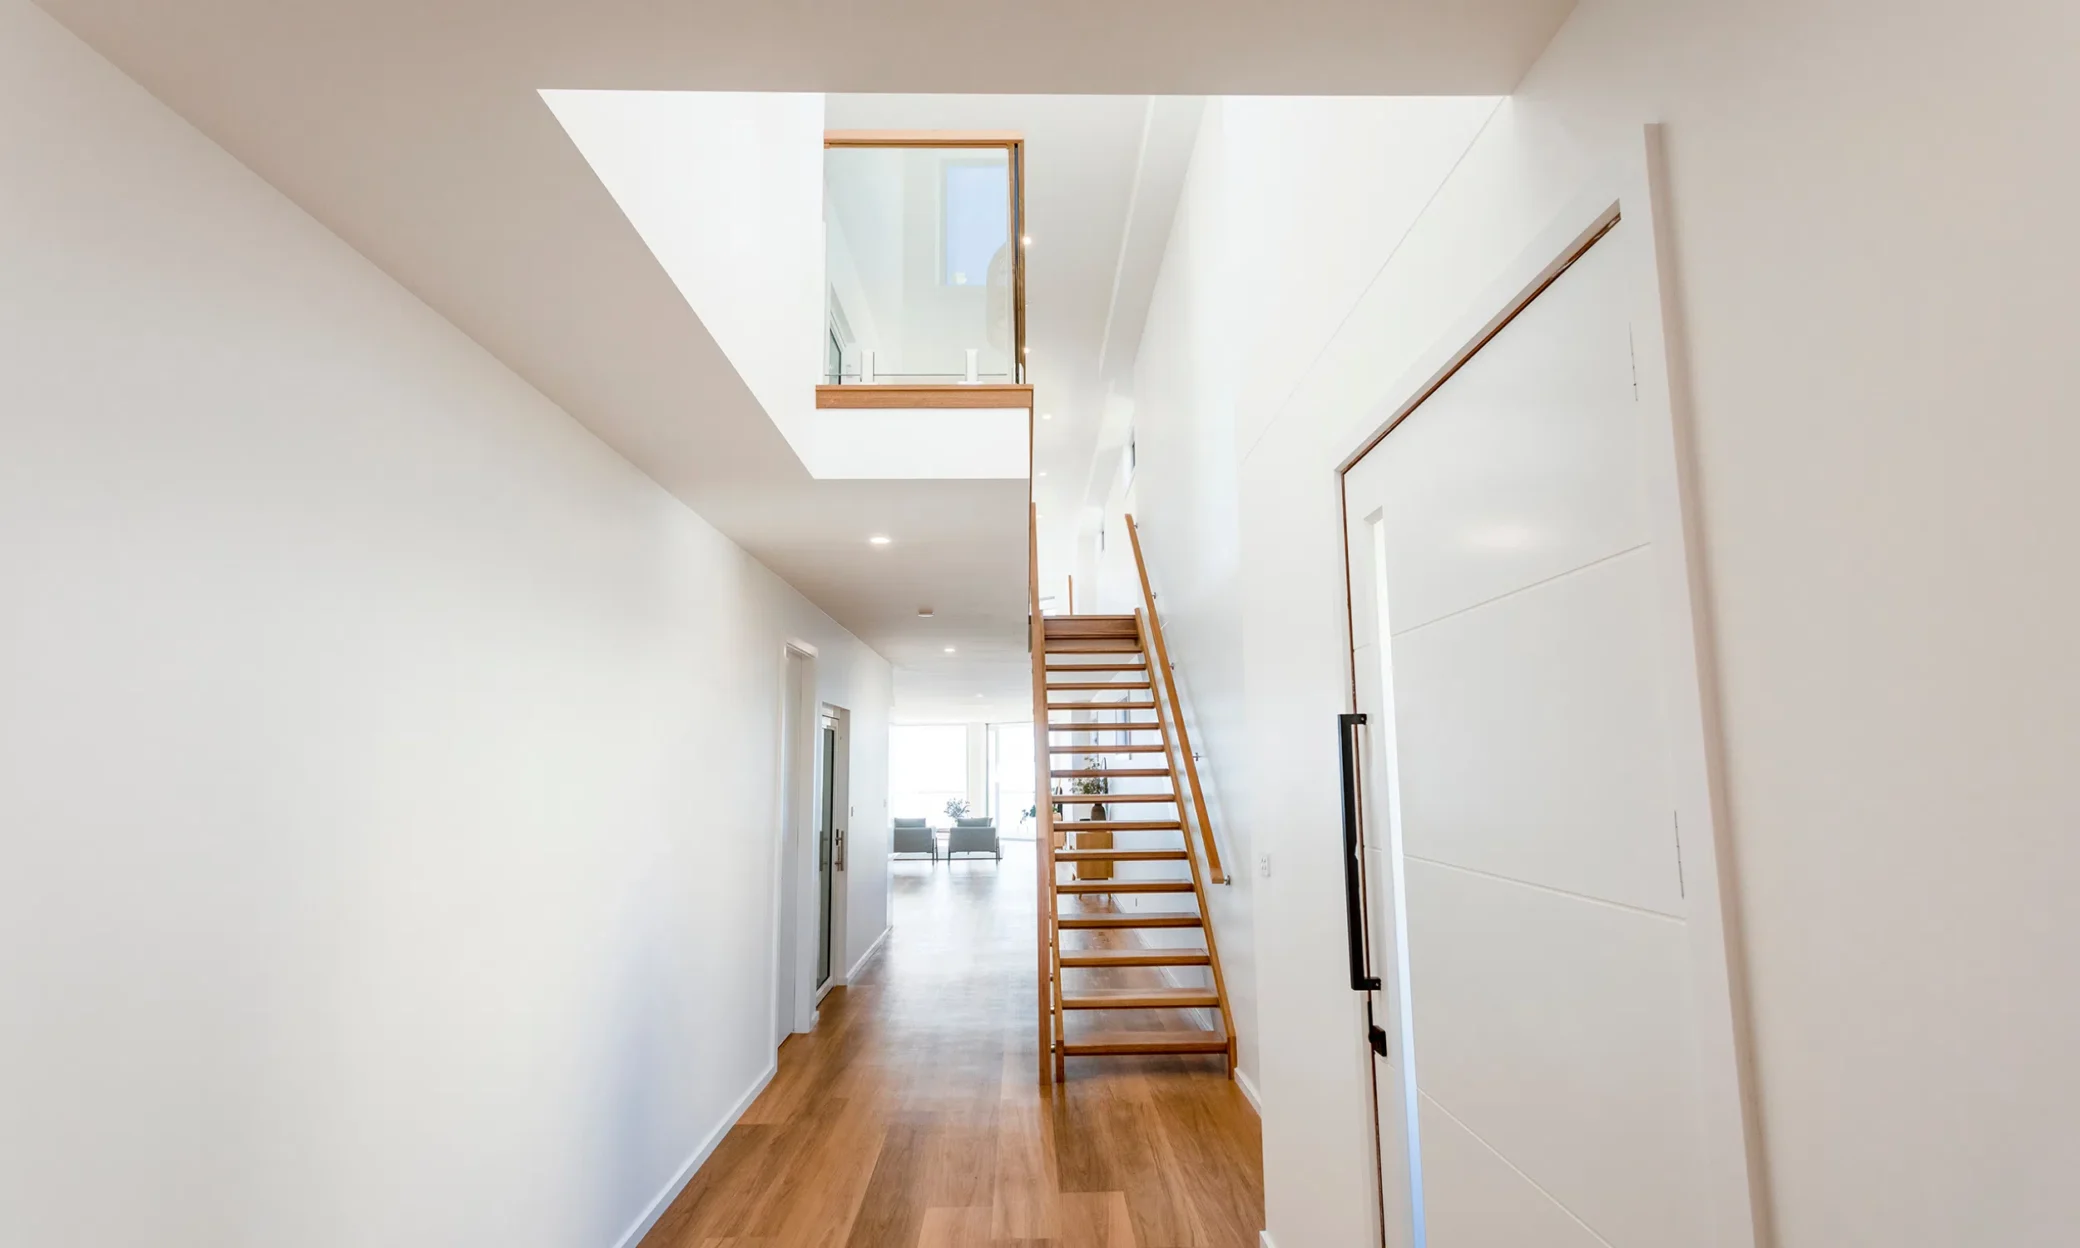 Modern hallway in a home in Newcastle with bright white walls and wooden flooring. It includes a skylight, a wooden staircase to the right leading up to an upper level, and a view into a